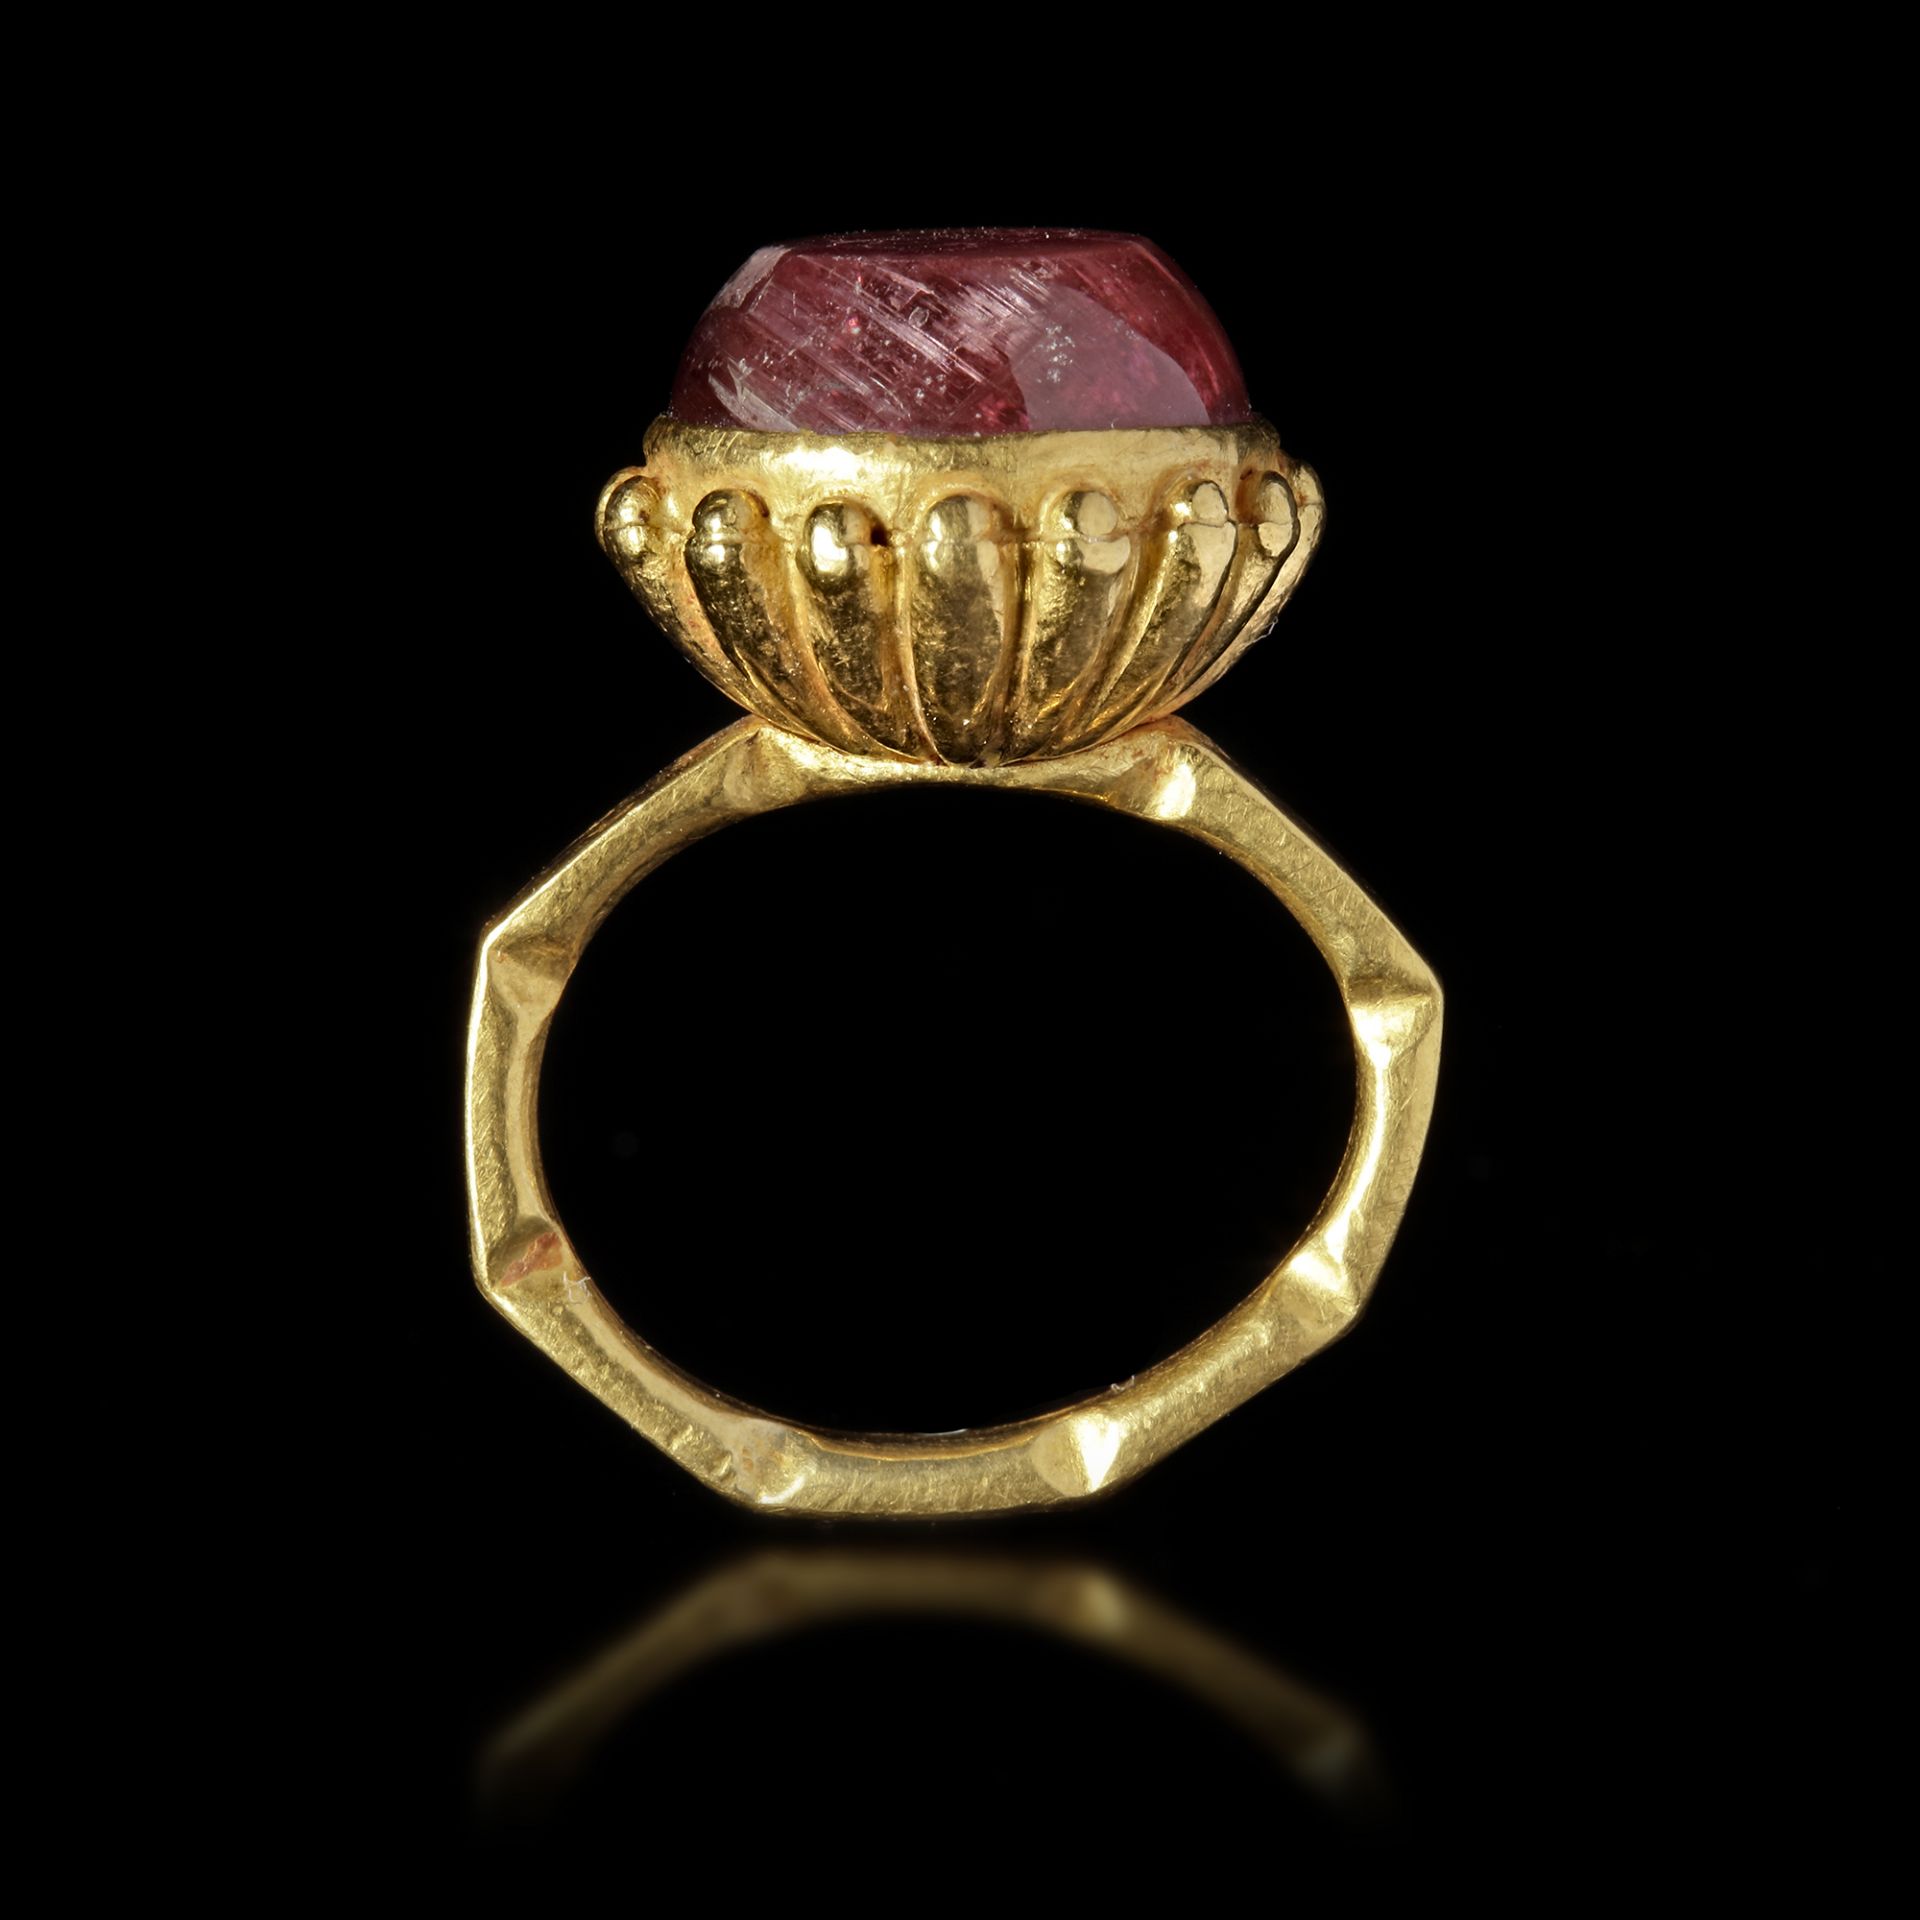 A LARGE BYZANTINE GOLD RING OF THE 'BASKET' TYPE, 5TH/6TH CENTURY AD